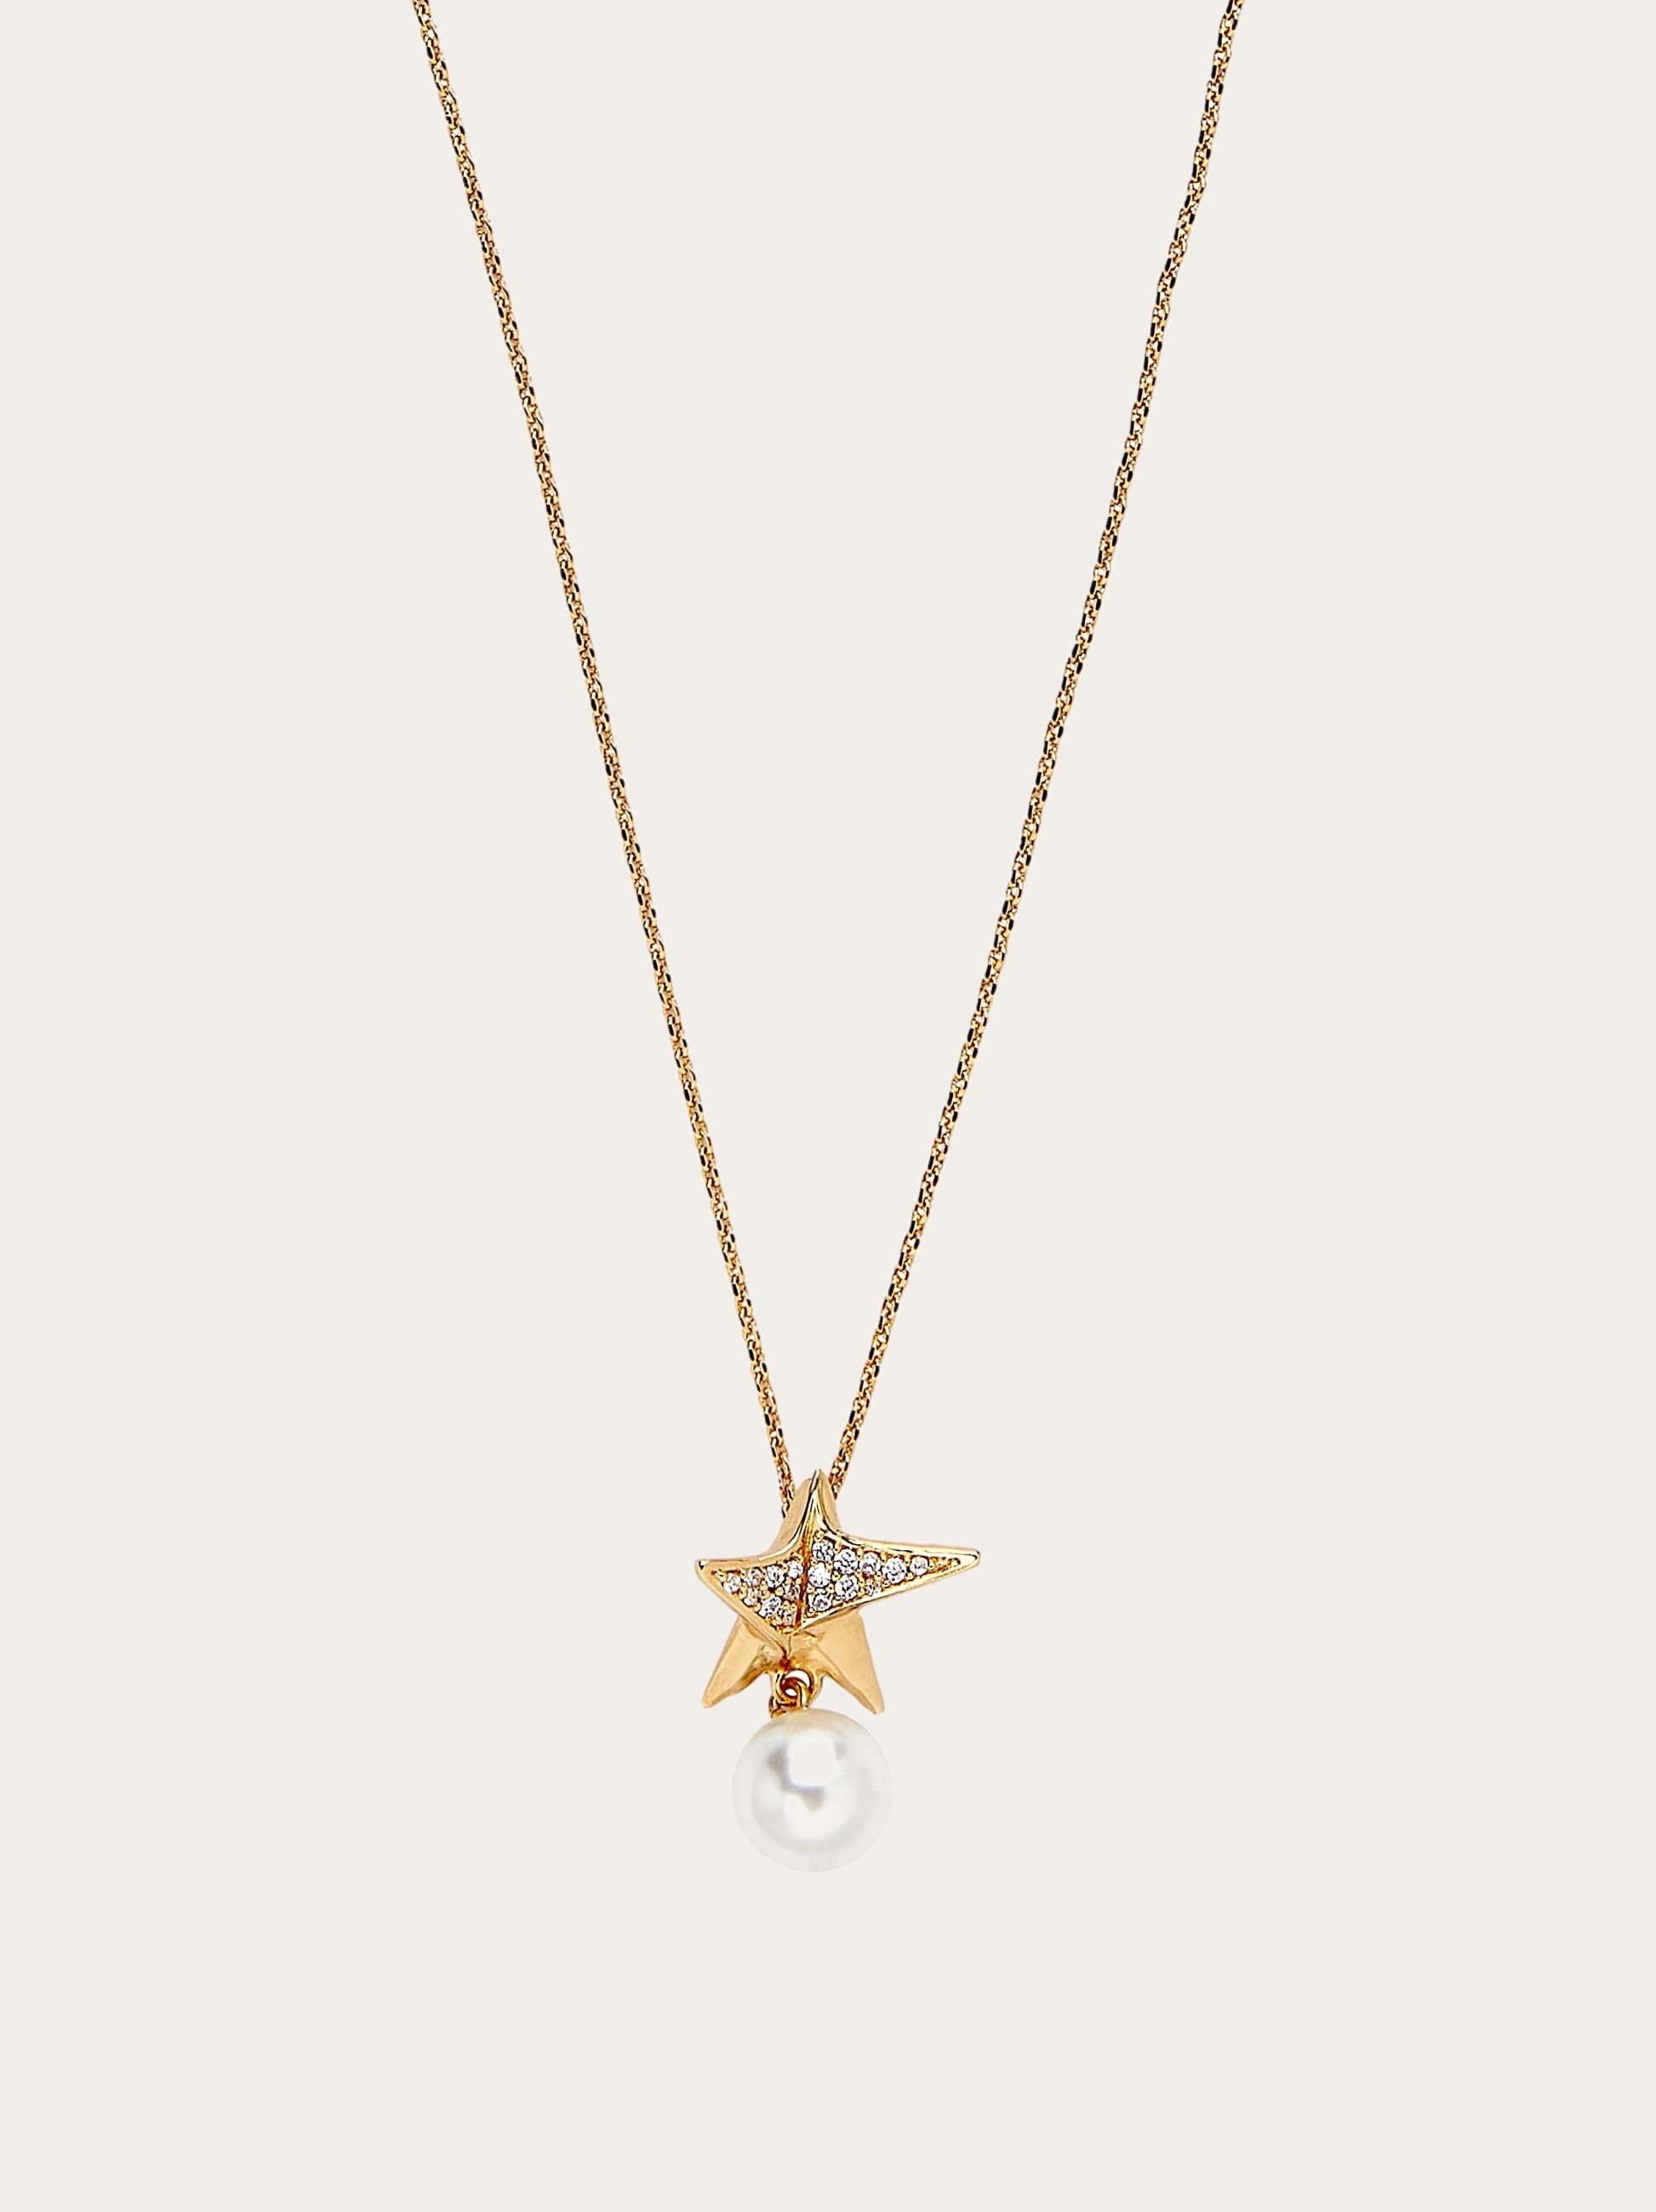 Necklace with star pendant - 5